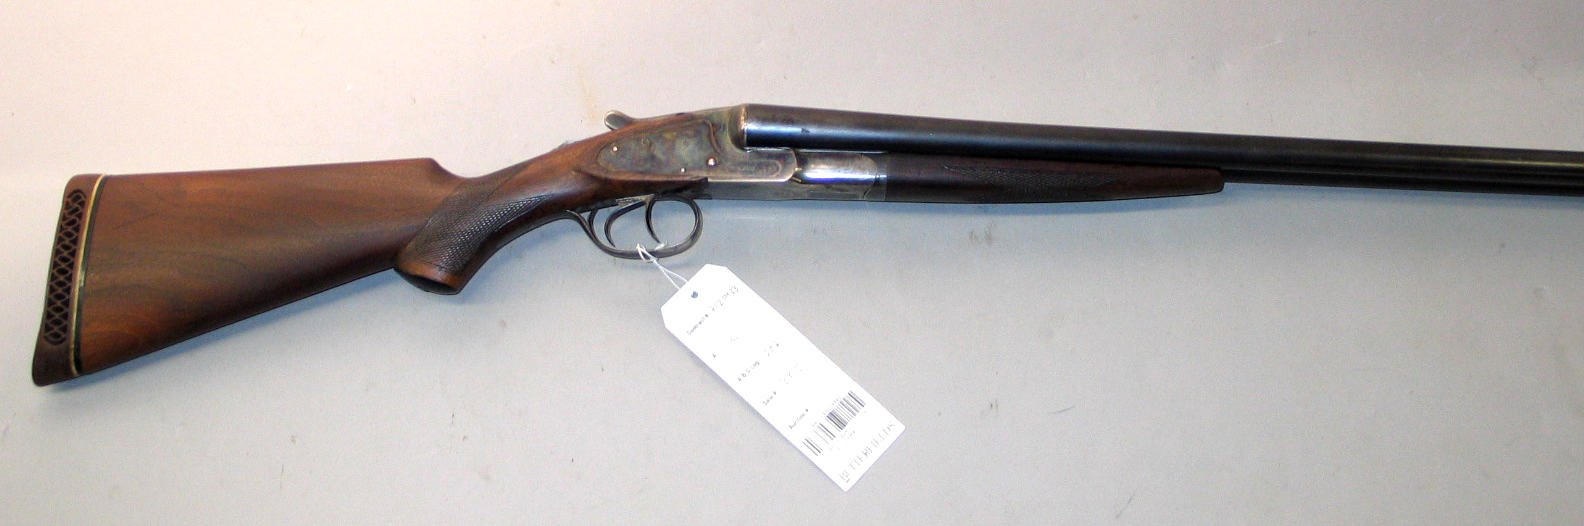 lc smith side by side shotgun